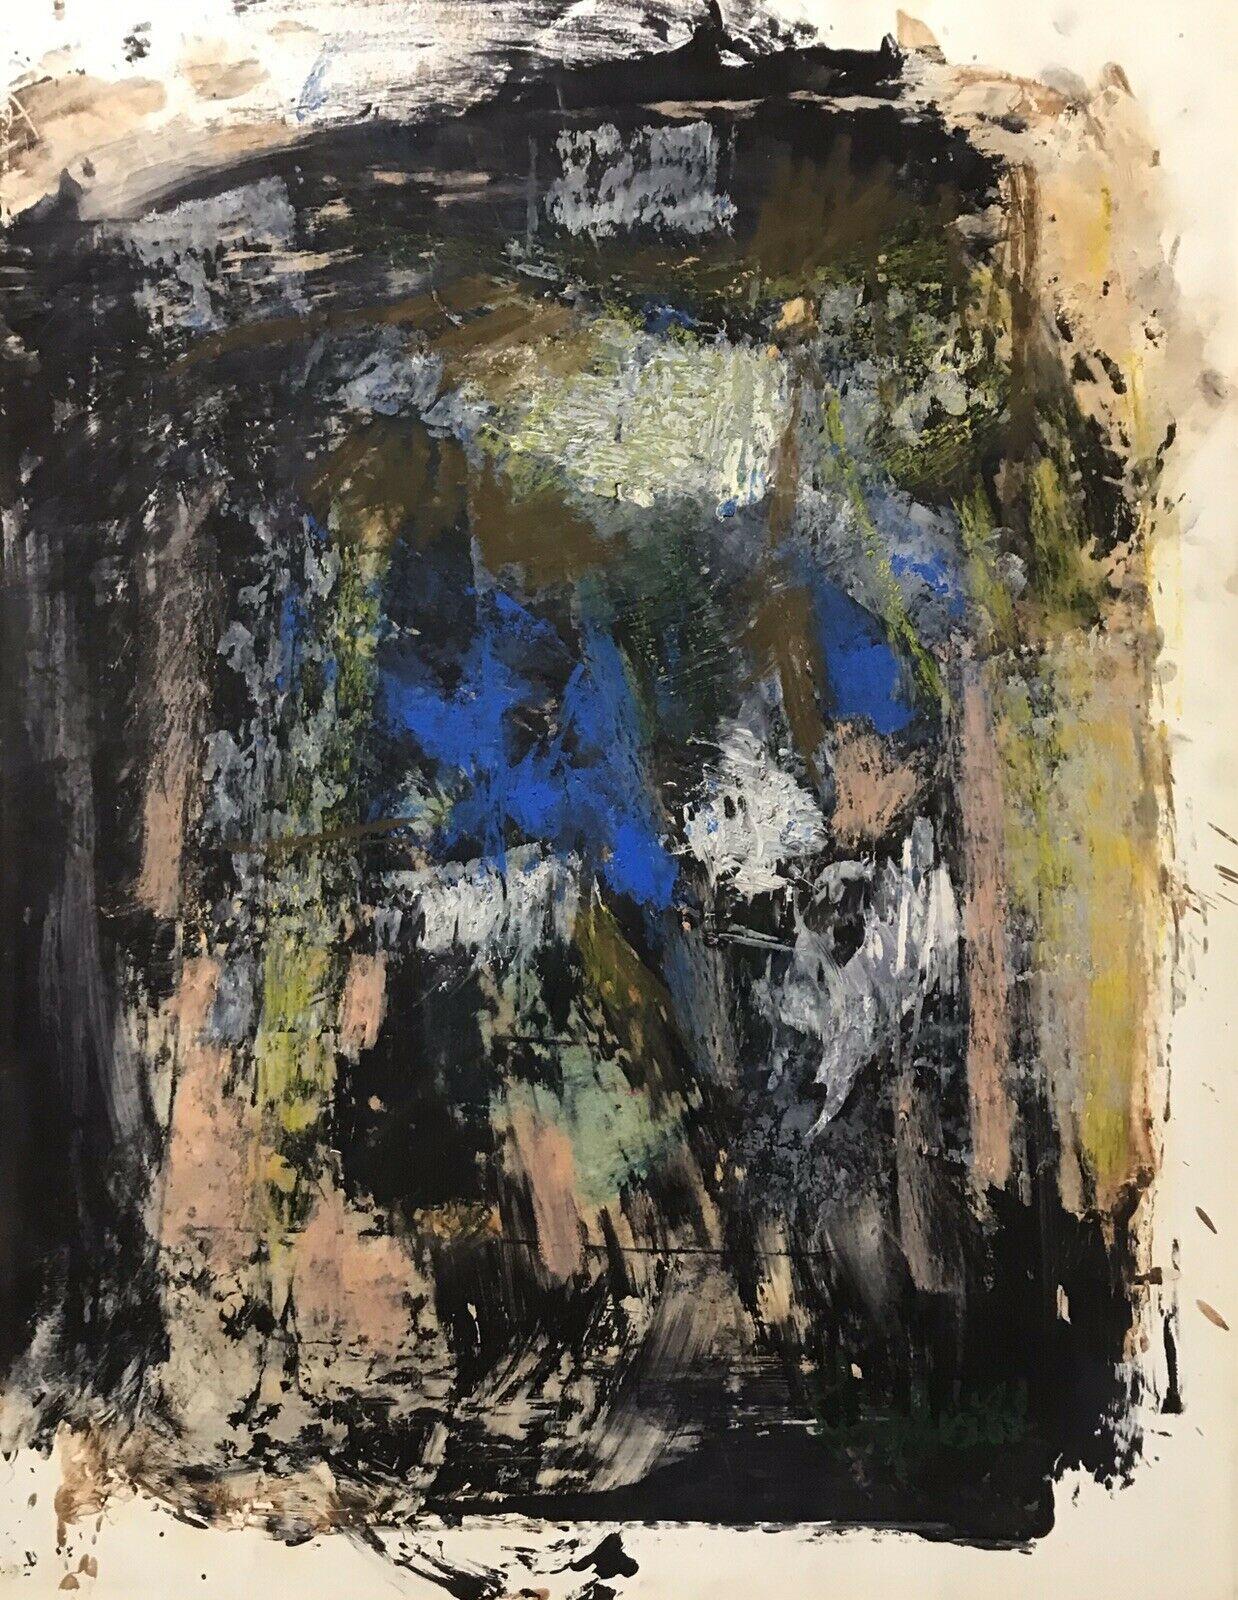 Unknown Abstract Painting - 1980's FRENCH EXPRESSIONIST OIL PAINTING - SIGNED & DATED - AMAZING MOVEMENT